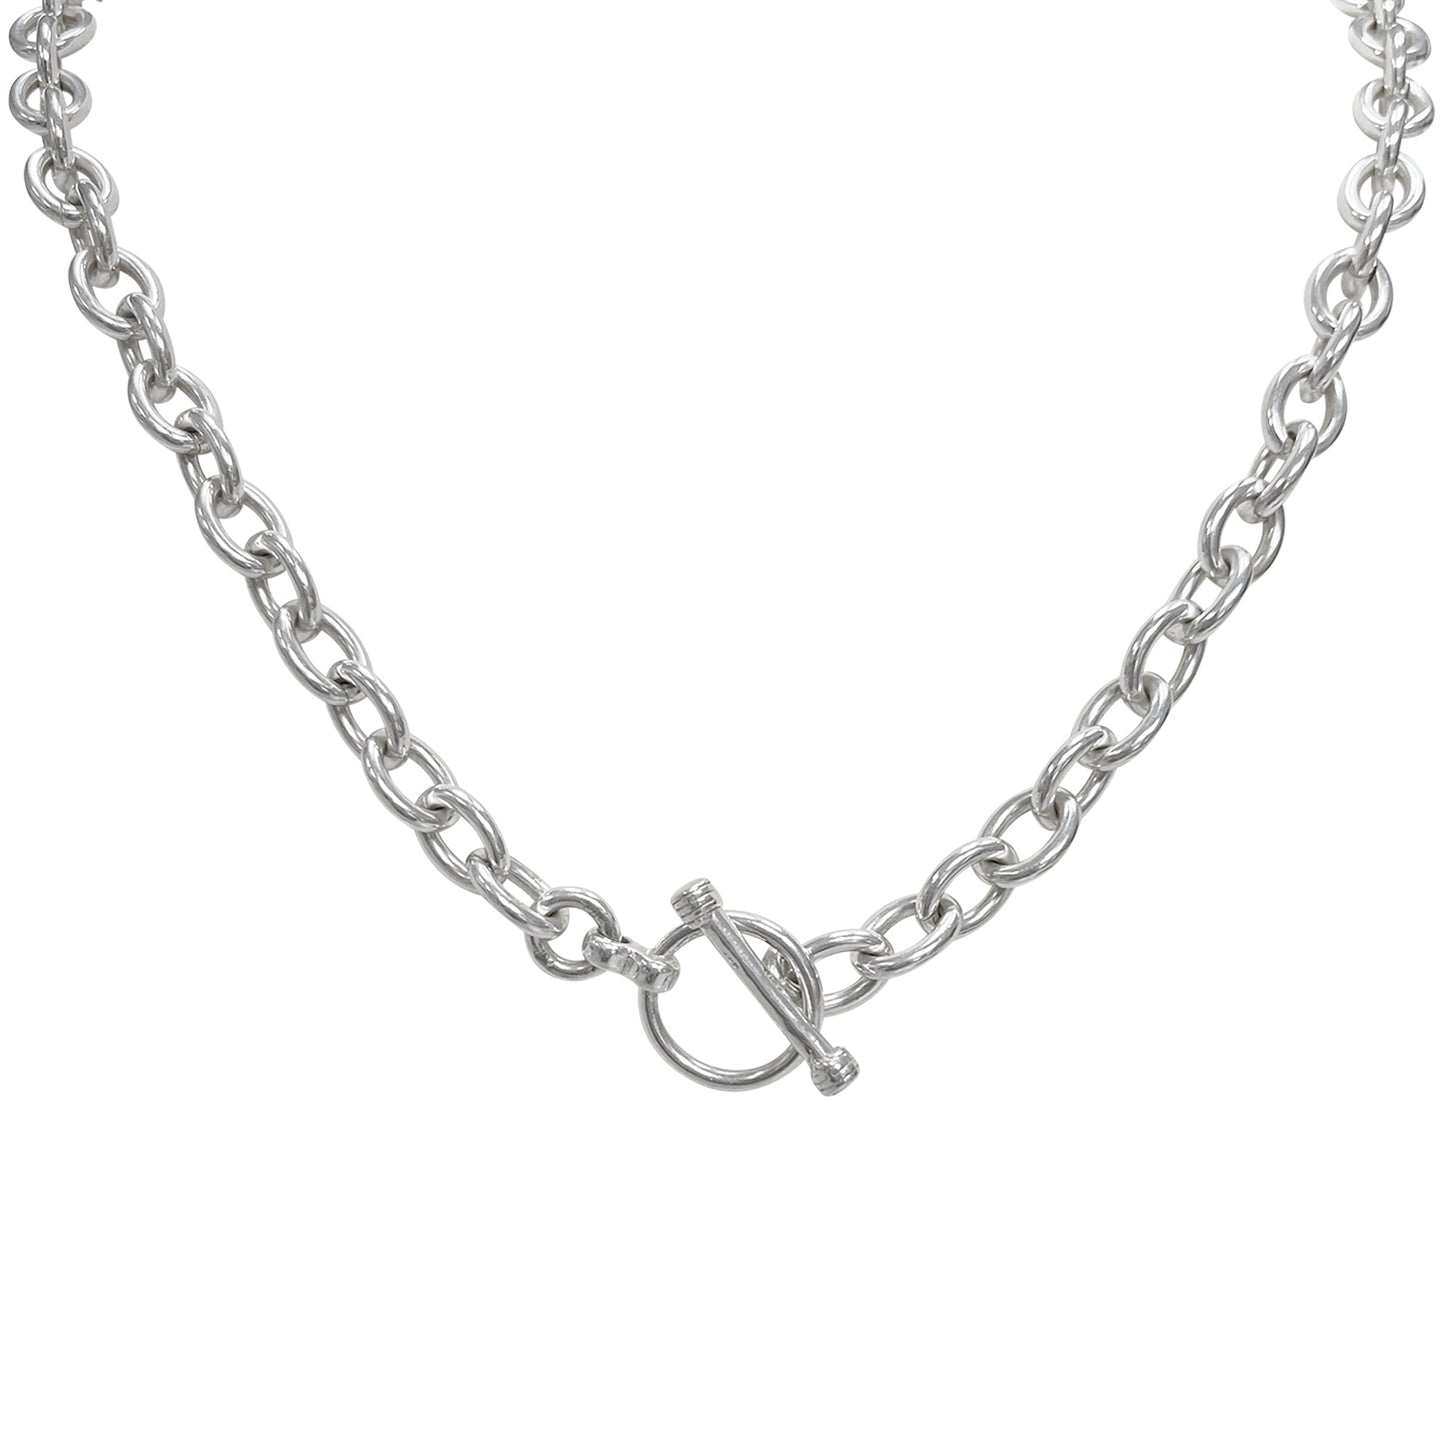 Toggle Me Up Sterling Silver Toggle Necklace Chain